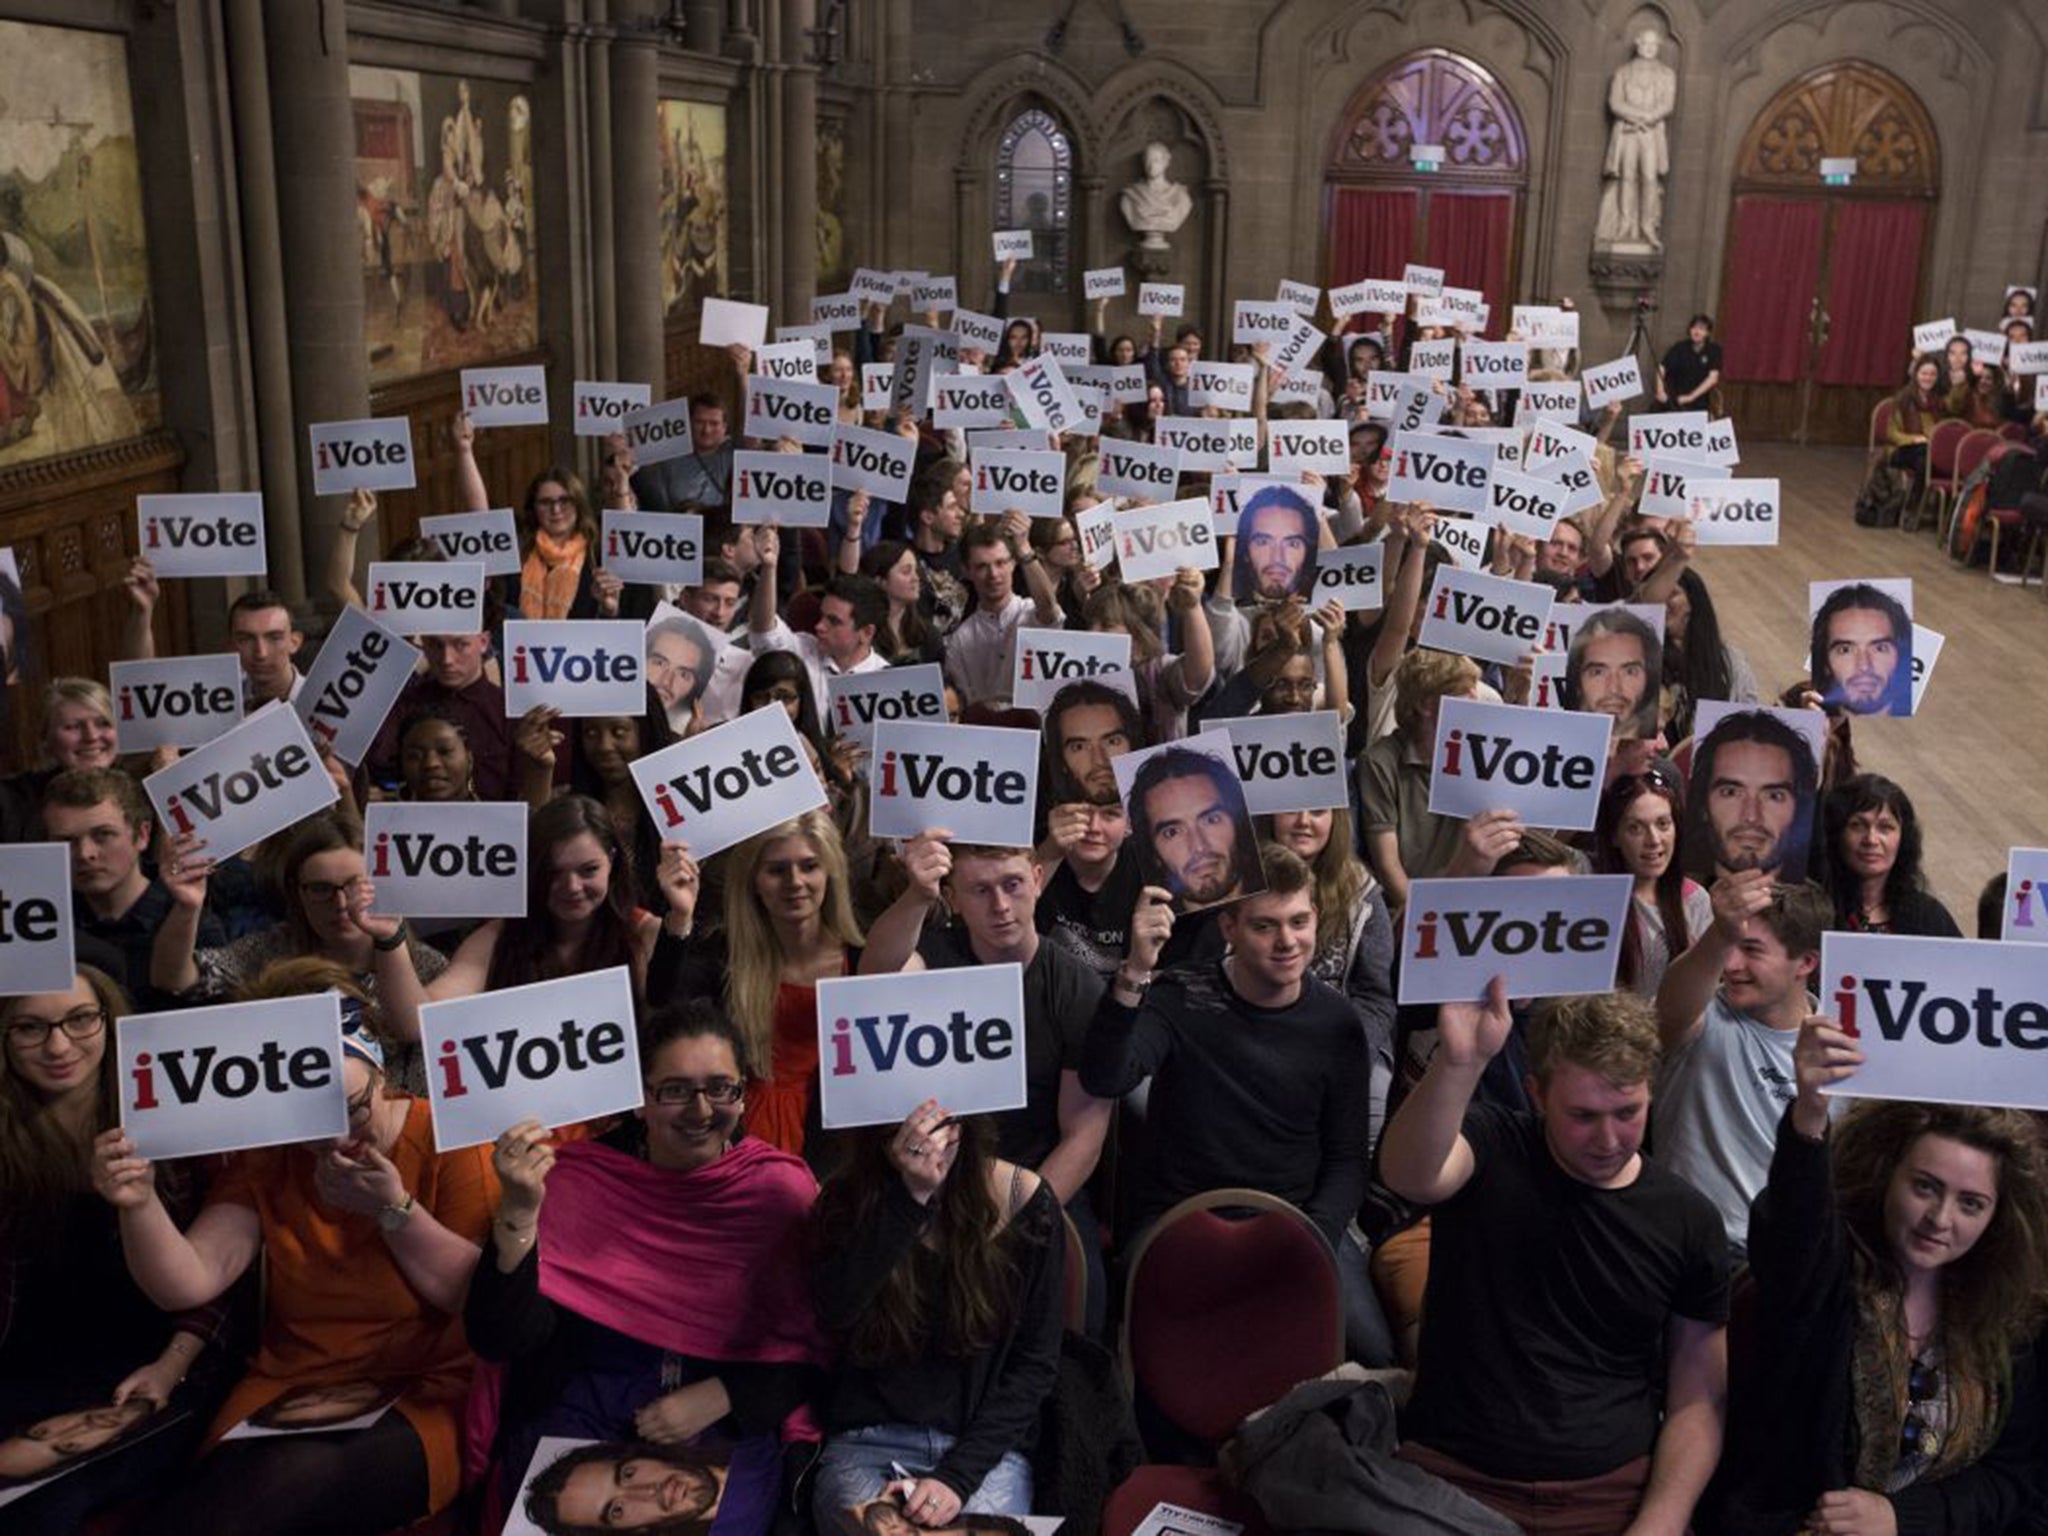 A photograph from the last iDebate in Manchester Town Hall